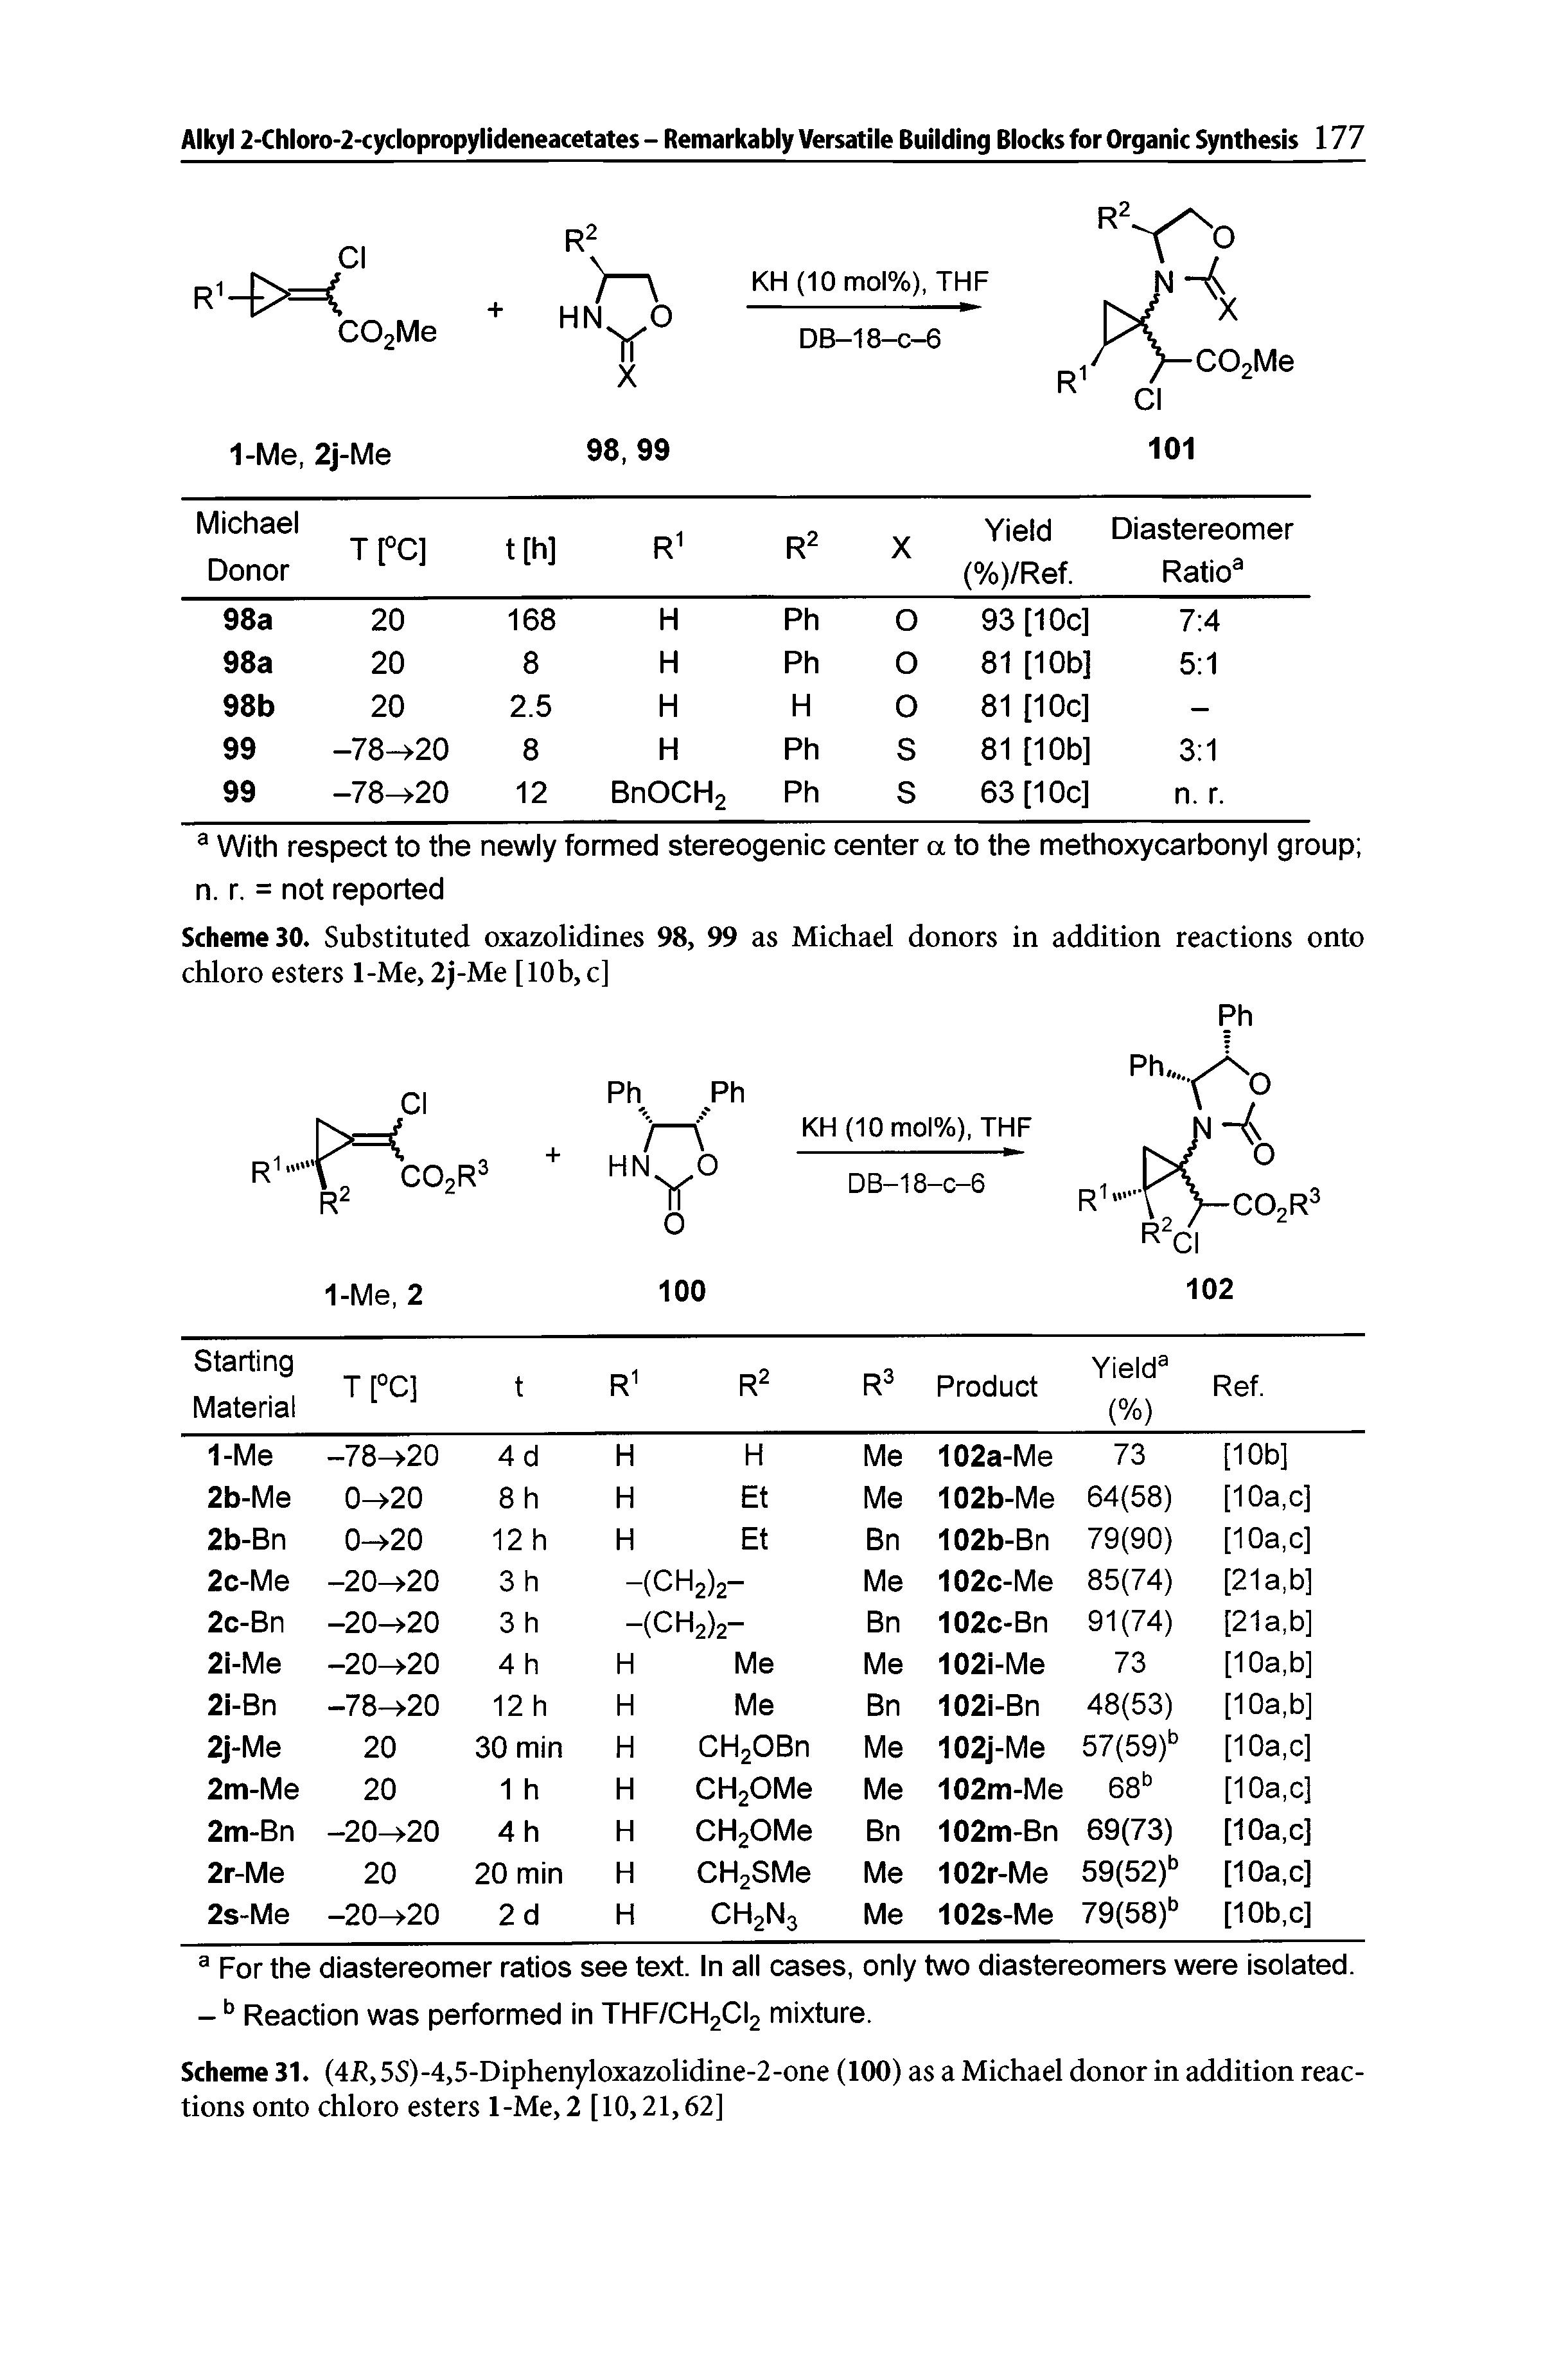 Scheme 31. (4E,5S)-4,5-Diphenyloxazolidine-2-one (100) as a Michael donor in addition reactions onto chloro esters 1-Me, 2 [10,21,62]...